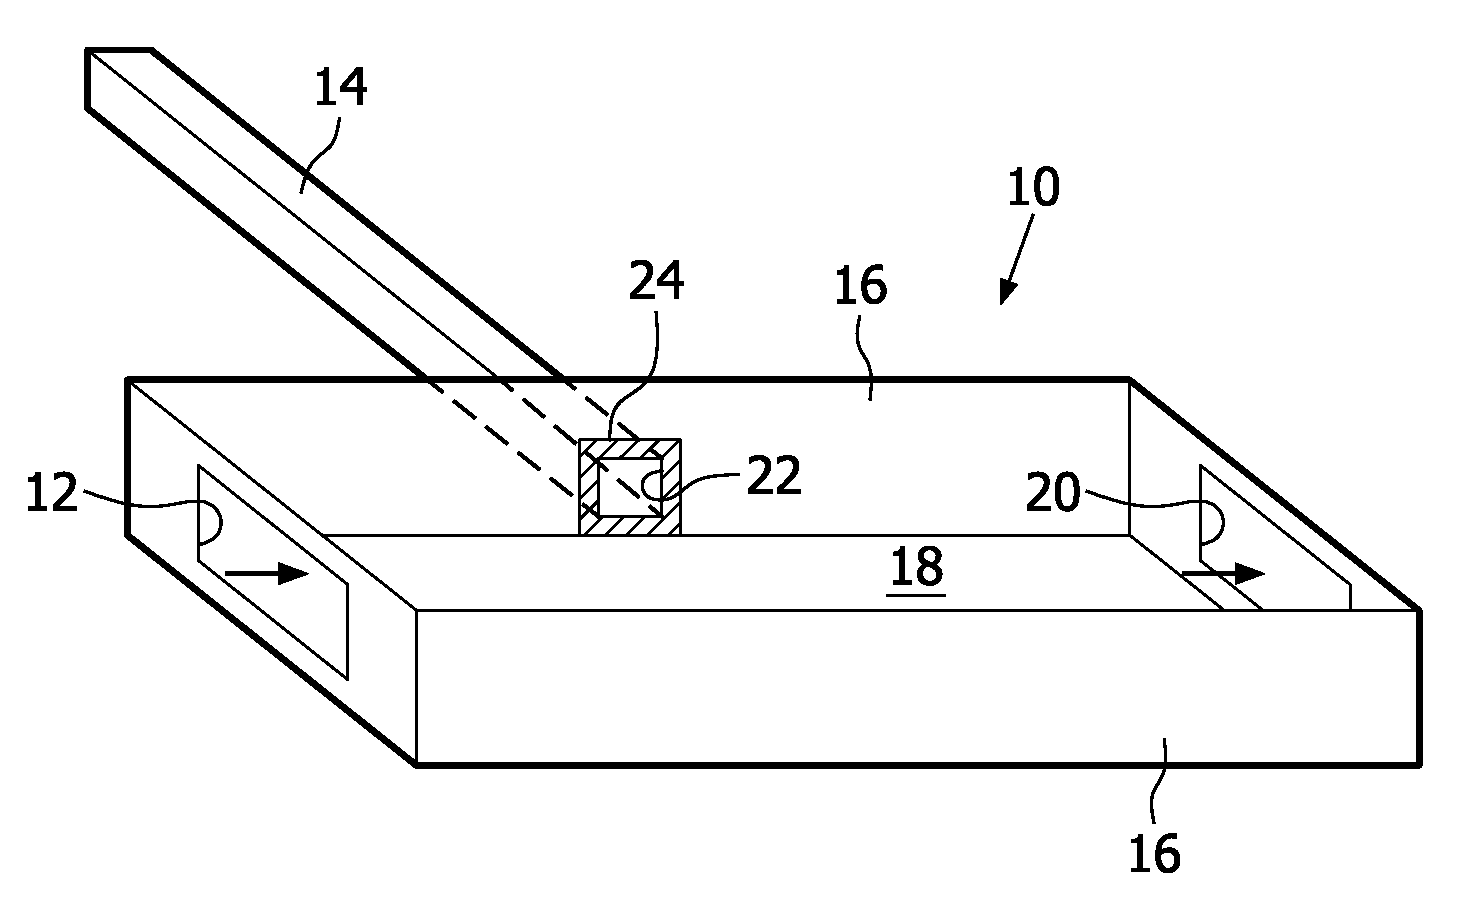 Interfacing an inlet to a capillary channel of a microfluidic system